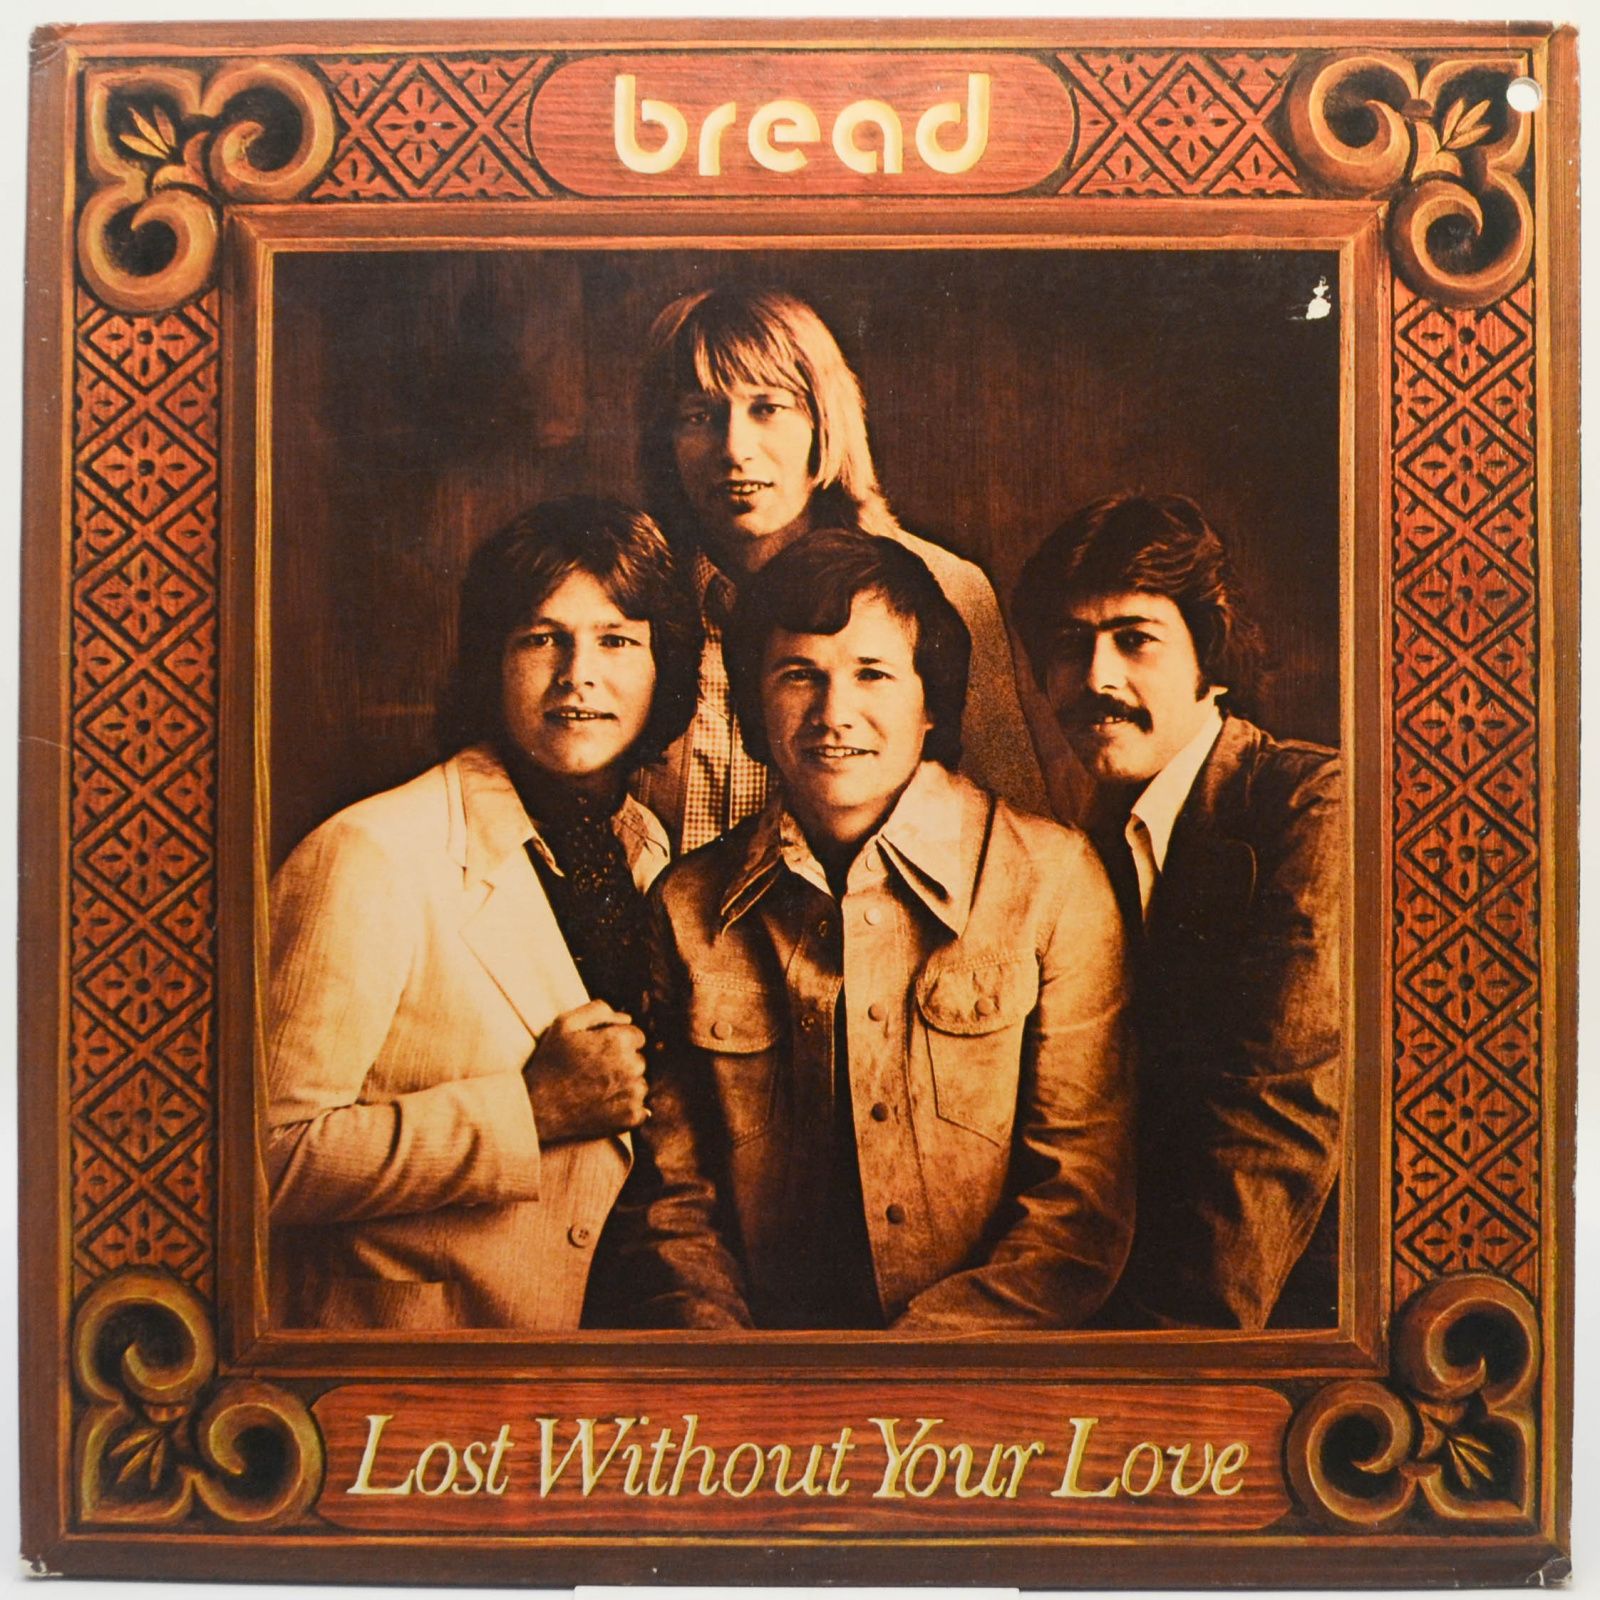 Bread — Lost Without Your Love, 1976